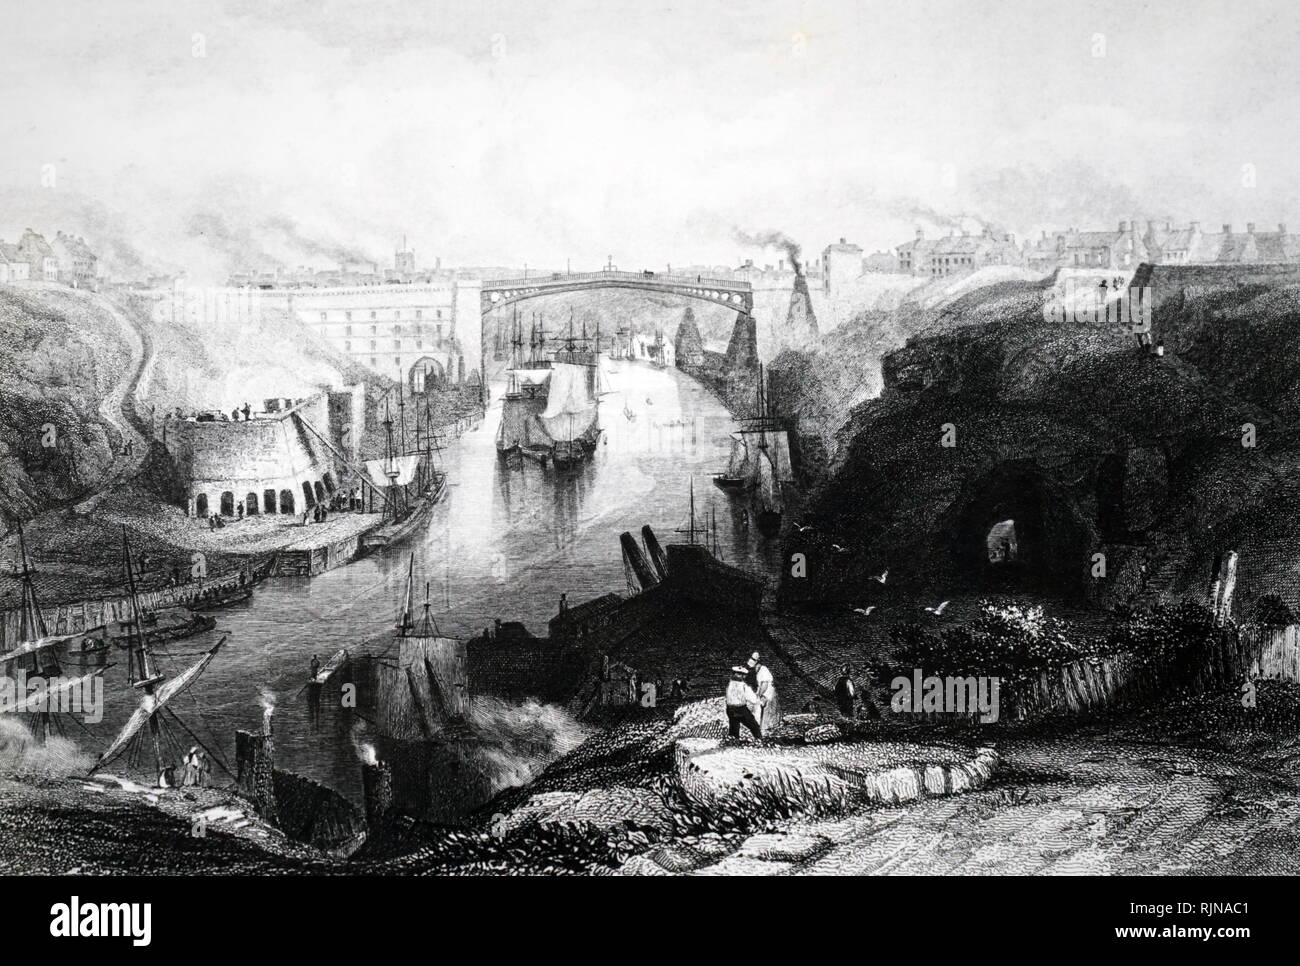 An engraving depicting a view of Sunderland and the iron bridge looking eastwards and showing shipping on the river and various industrial activities including lime kilns (centre left). Engraving by William Finden (1787-1852) after the picture by George Balmer (1806-1846). Dated 19th century Stock Photo